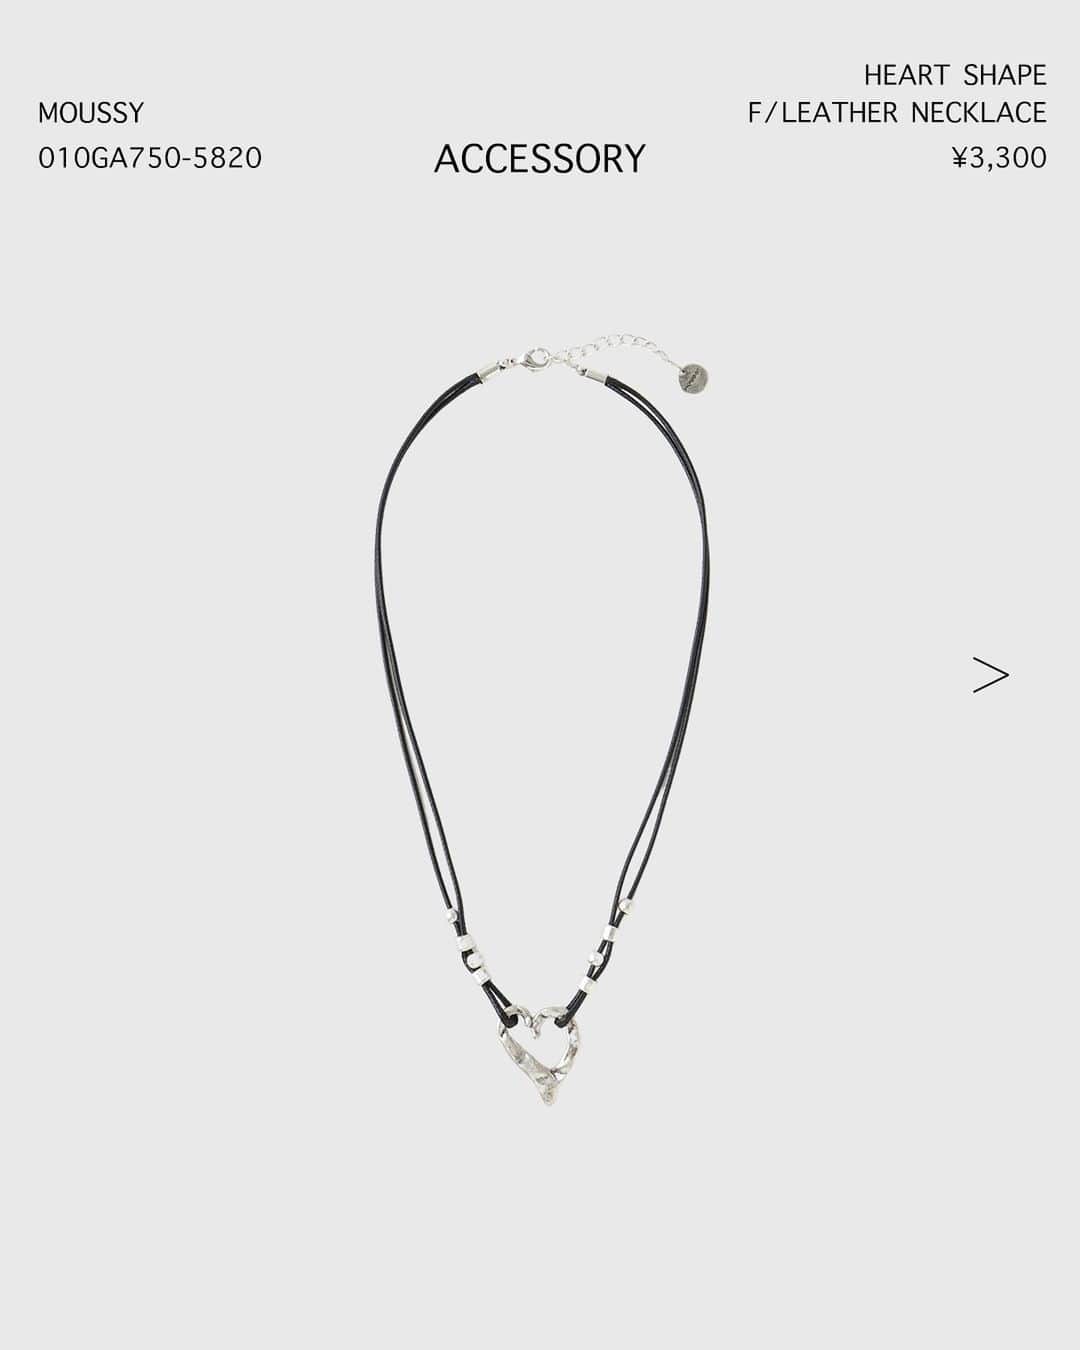 SHEL'TTER WEB STOREさんのインスタグラム写真 - (SHEL'TTER WEB STOREInstagram)「【NEW IN】 - ACCESSORY -  ━━━━━━━━━━━━━━━━  【MOUSSY】HEART SHAPE F／LEATHER ネックレス ¥3,300 tax in Size：FREE Color：BLK,L/PUR No：010GA750-5820 ※発売中  【SLY】VARIOUS CHAIN ピアス ¥3,300 tax in Size：FREE Color：SLV,GLD No：030GAR56-2550 ※発売中  【rienda】Rロゴブローチ ¥2,750 tax in Color：GLD,SLV No：110GA856-0450 ※発売中  【LAGUA GEM】SWELL ヘアクリップ ¥3,300 tax in Size：FREE Color：SLV,GLD No：510GAZ56-0700 ※発売中  気になるアイテムは画像をタップまたは  プロフィールのサイトURLをクリック✔  ━━━━━━━━━━━━━━━━  #SHELTTERWEBSTORE #SWS #MOUSSY #LAGUAGEM #rienda #SLY #newin #2023AW #autumn2023 #accessory #heartnecklace #hairclips #brooch #pierce  #新作 #アクセサリー #レザーアクセサリー #ハートモチーフ #ハートネックレス #ブローチ #ヘアクリップ #デザインアクセサリー #ネックレス #ピアス」10月4日 21時12分 - sheltterwebstore